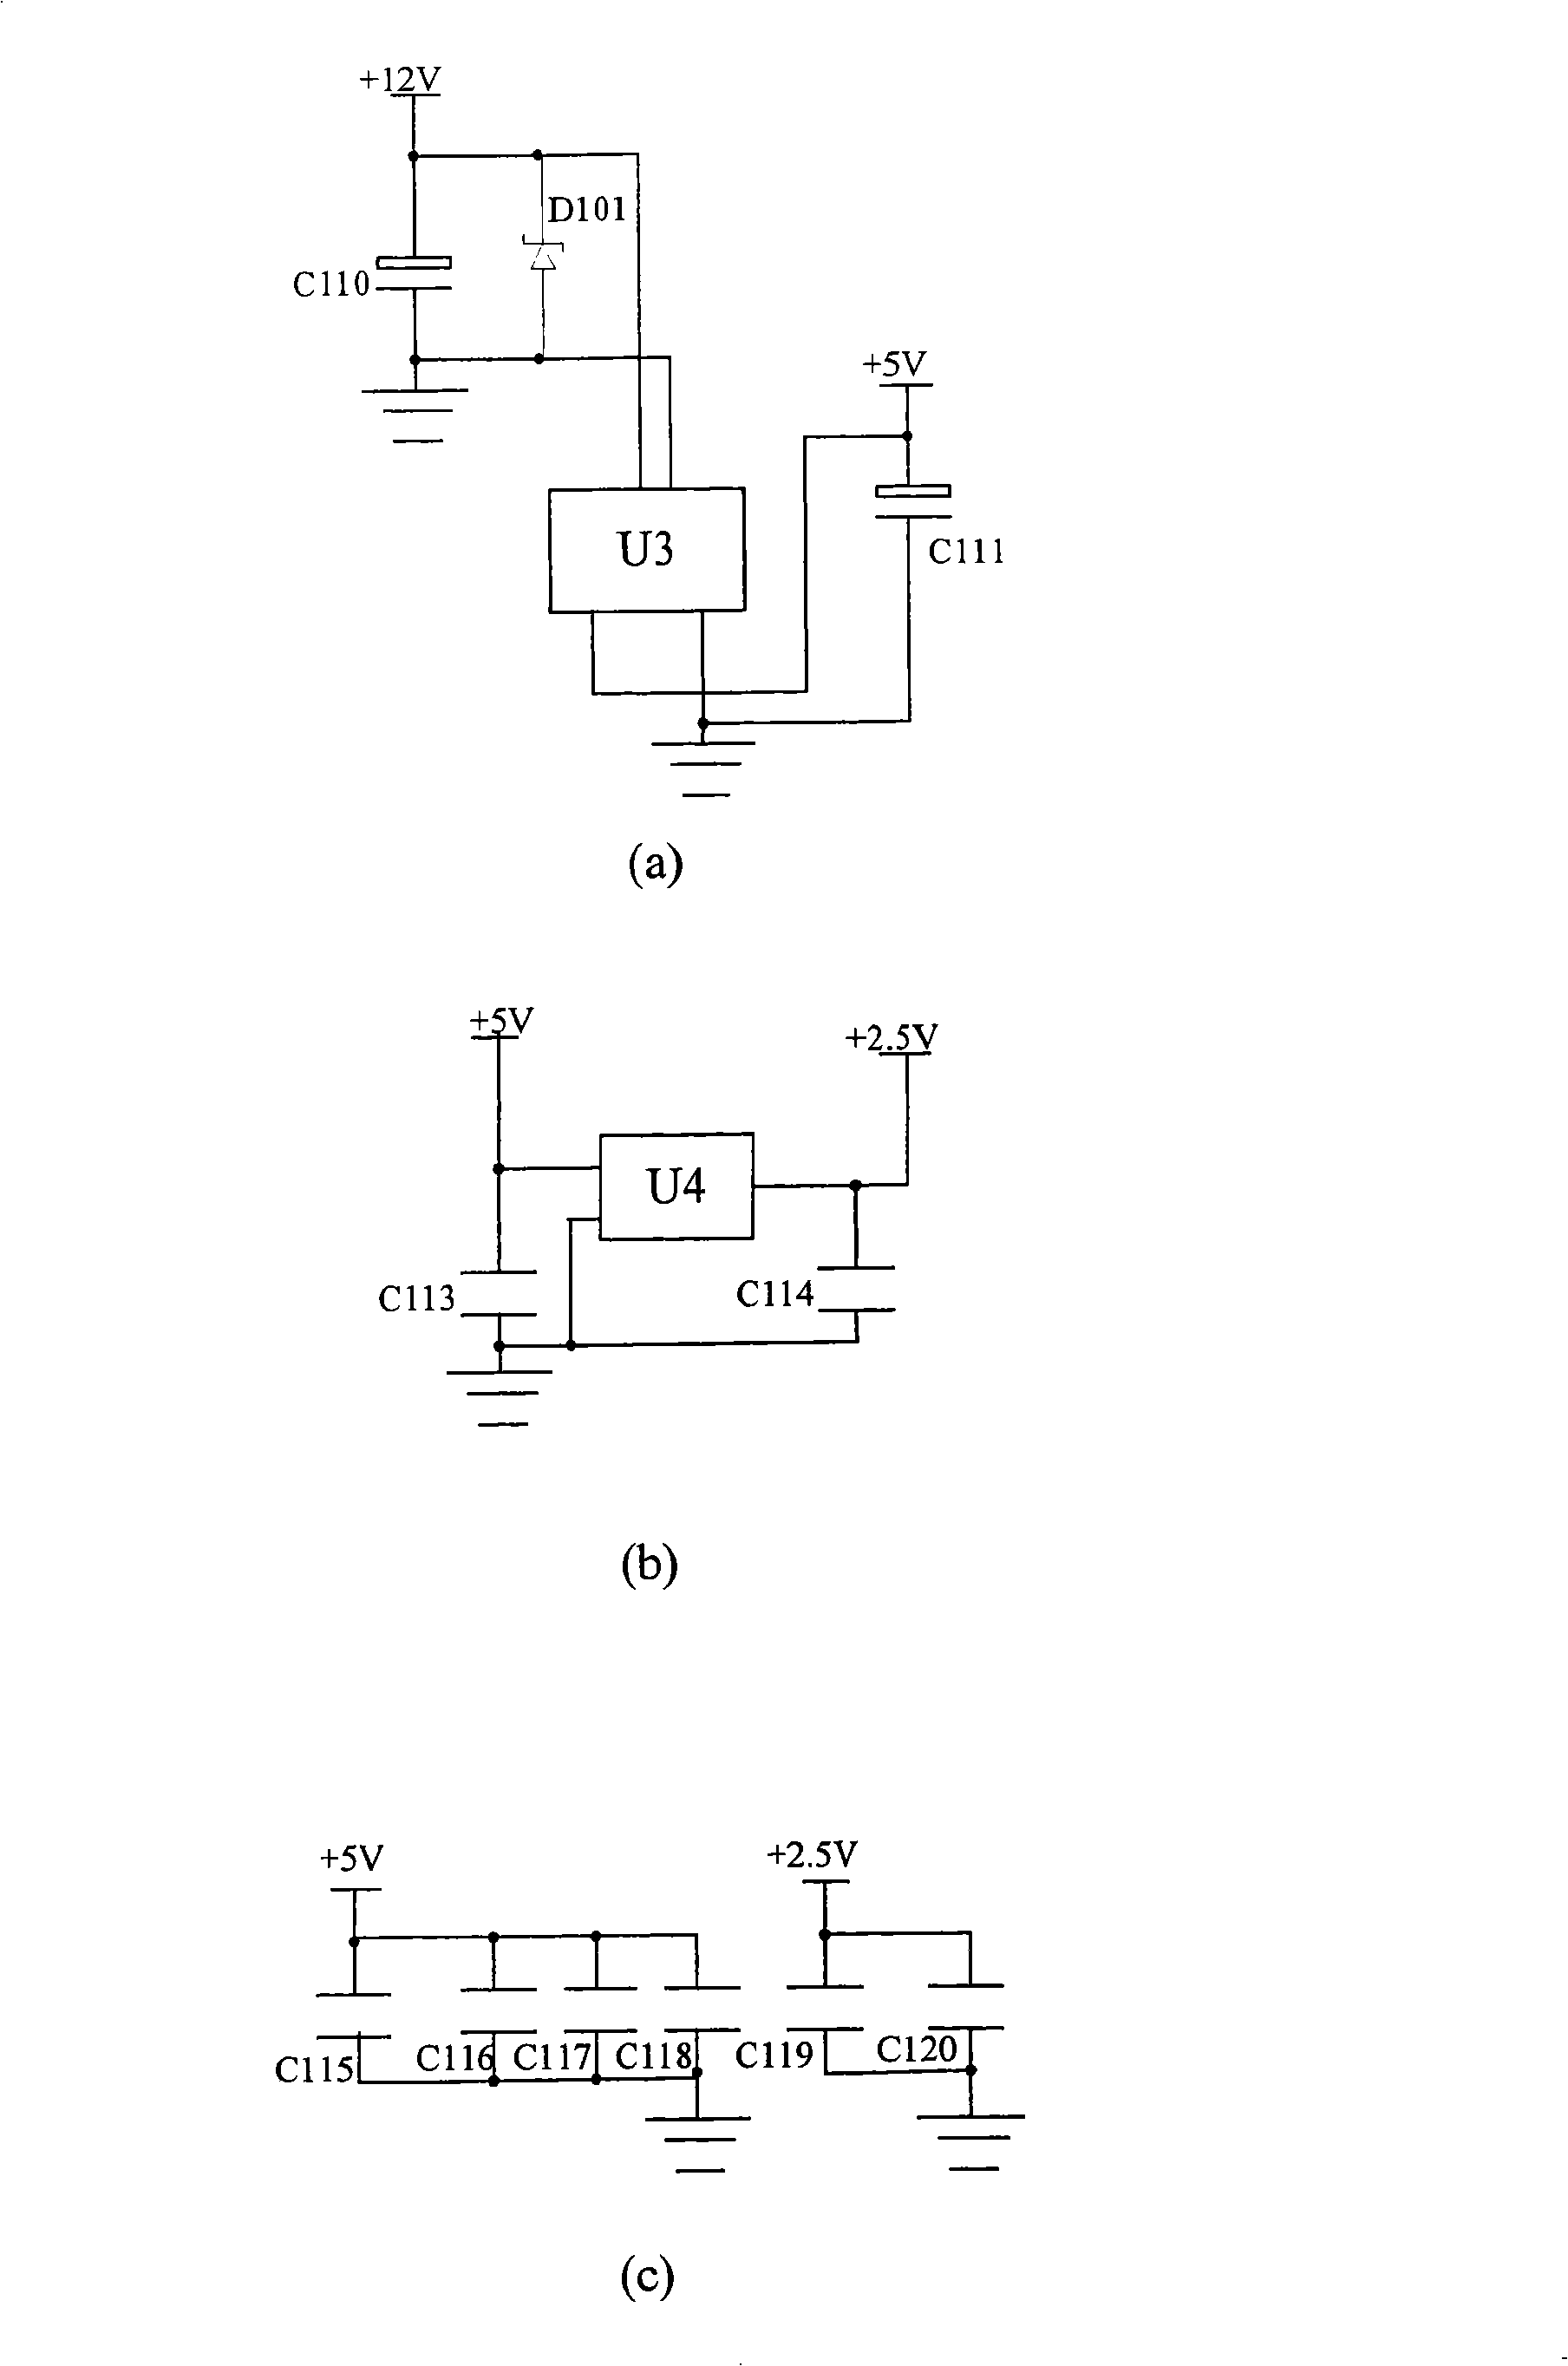 Electric mechanical type brake system electric control unit based on CAN bus network communication